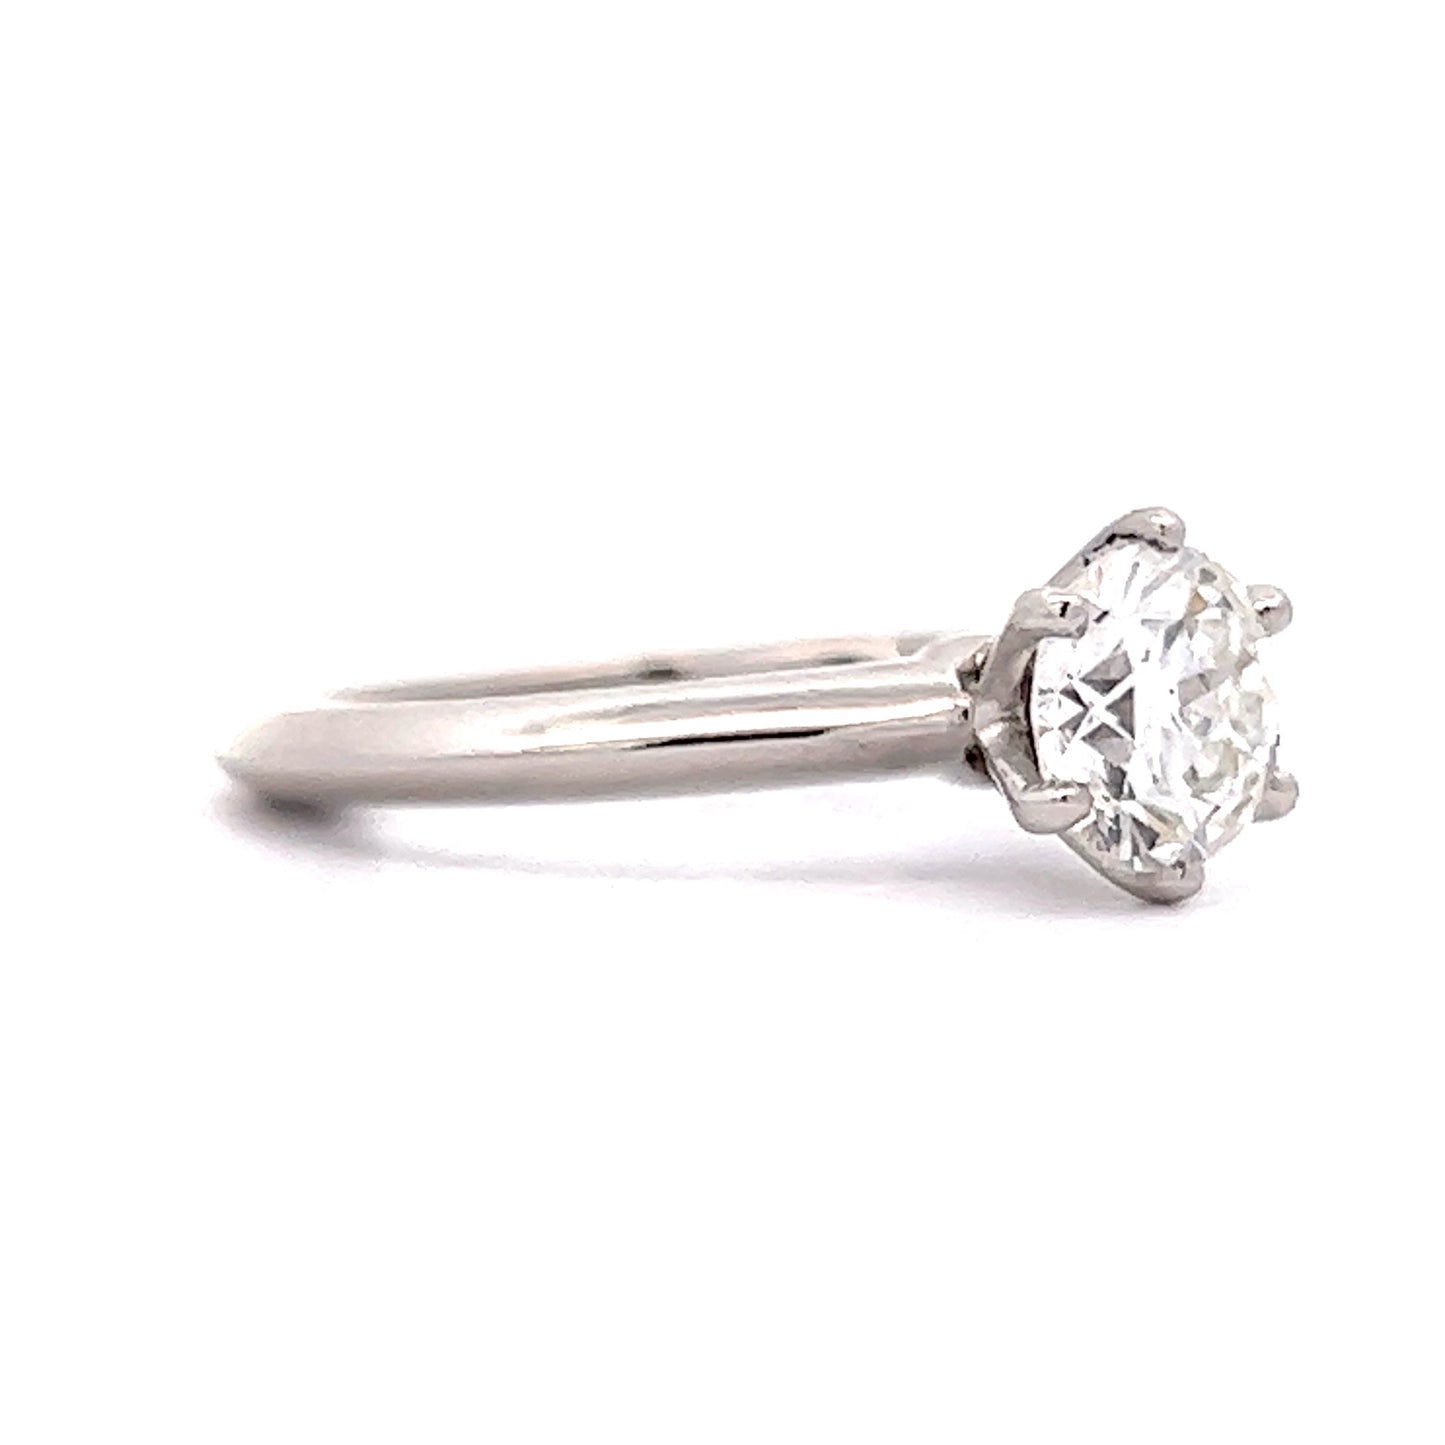 1.07 Tiffany & Co. Solitaire Diamond Engagement Ring in Platinum